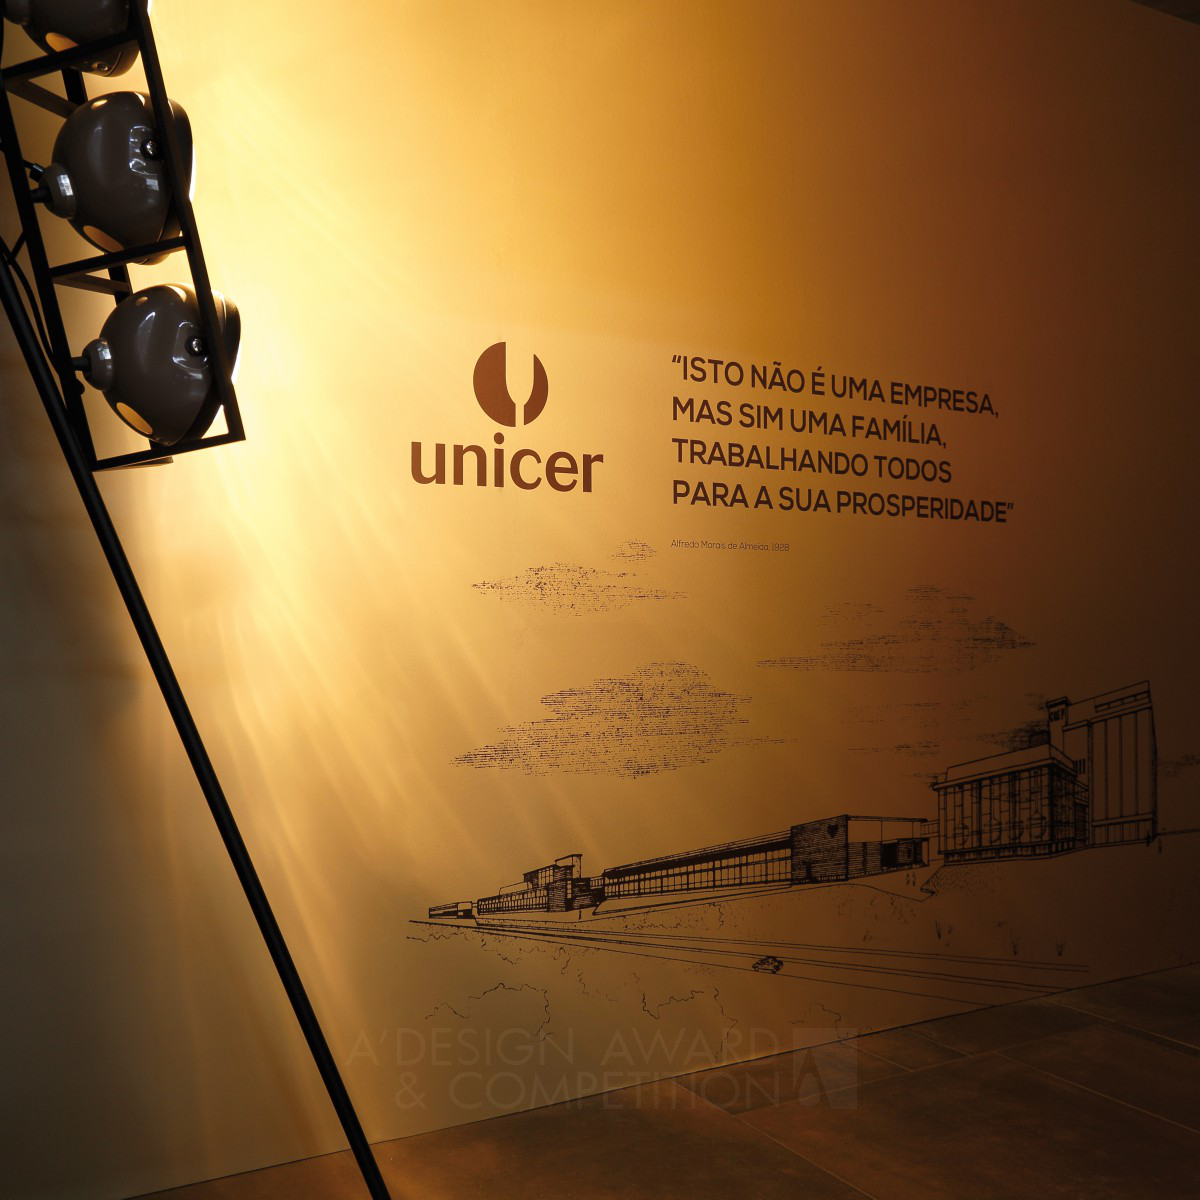 125 Years Unicer Exhibition by Omdesign